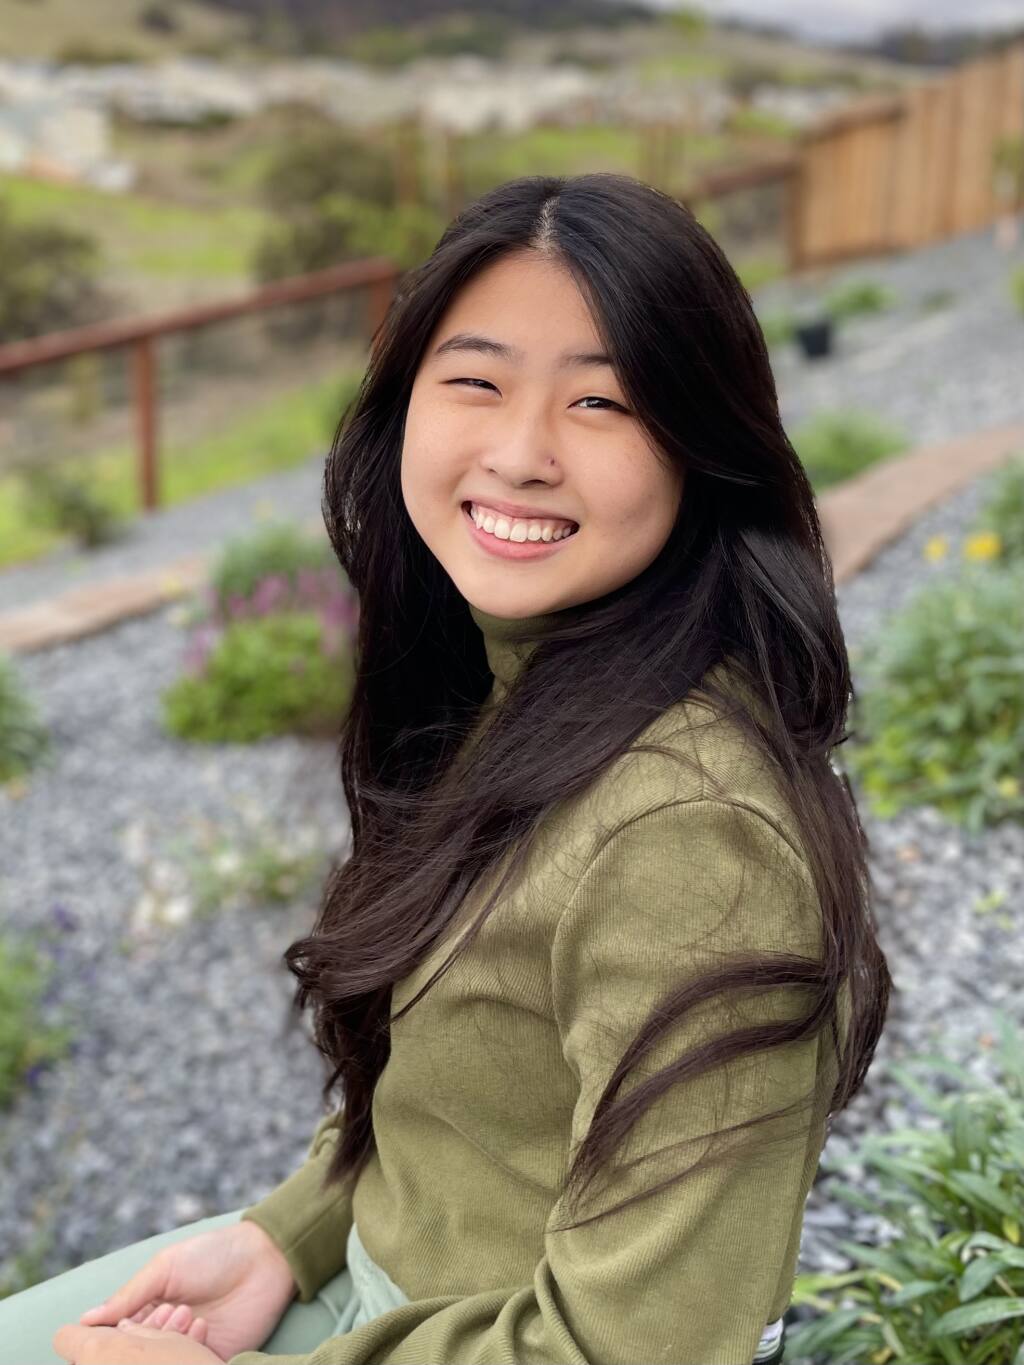 Ella Wen, 16, was announced on Nov. 5 as Sonoma County’s new youth poet laureate by “California Poets in the Schools,” a nonprofit that amplifies young creative voices in California. (California Poets in the Schools)